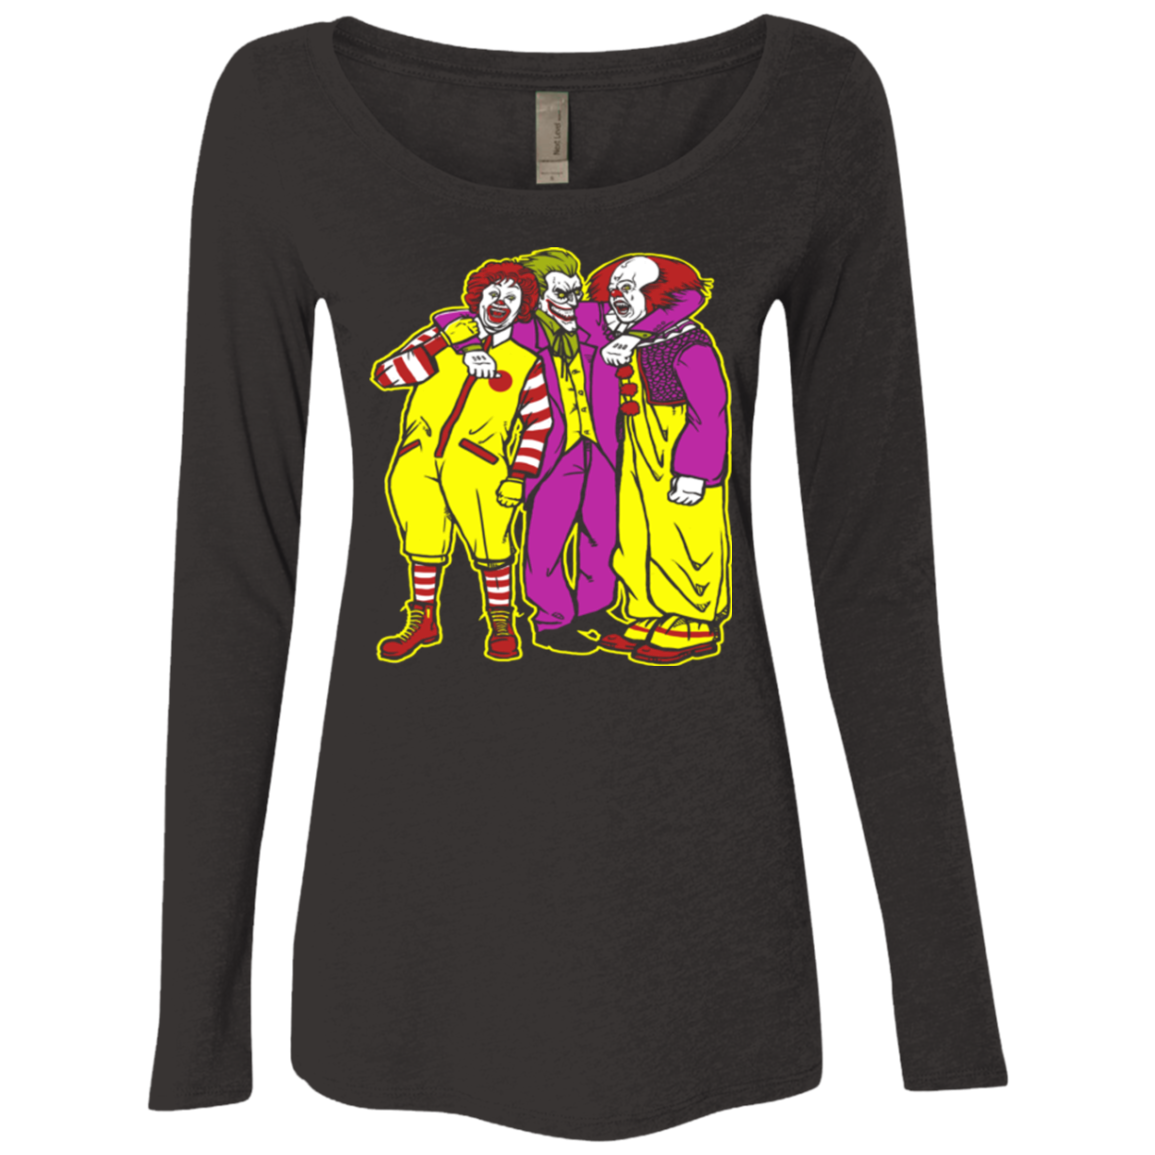 Whos Laughing Now Women's Triblend Long Sleeve Shirt